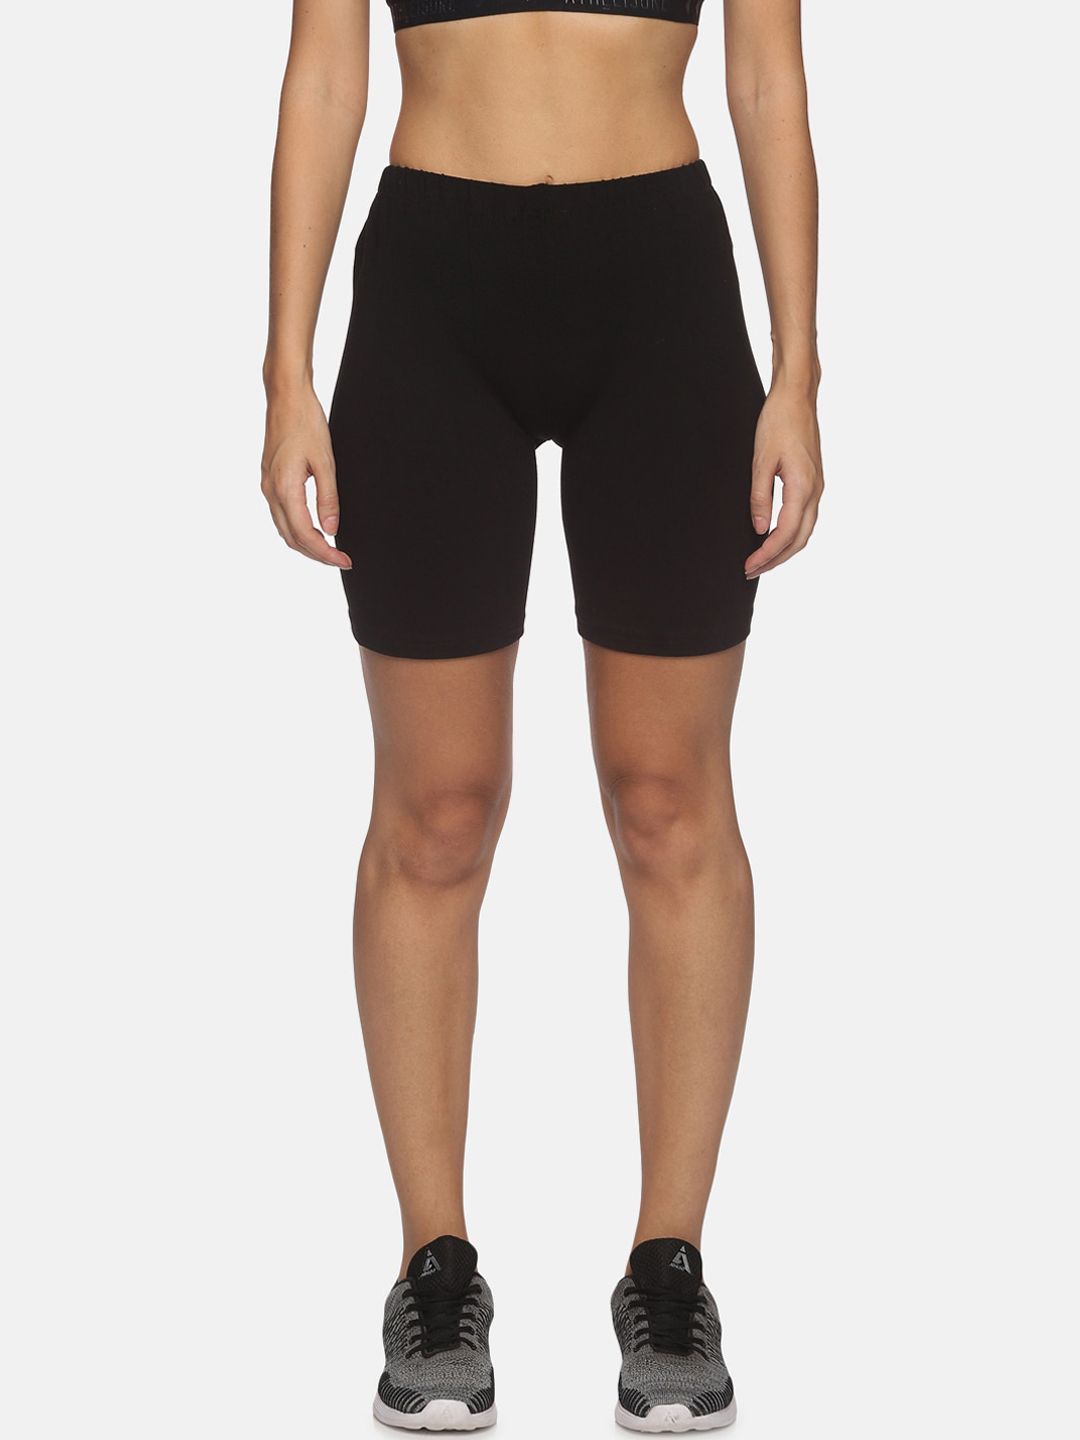 NOT YET by us Women Black Slim Fit Outdoor Sports Shorts Price in India